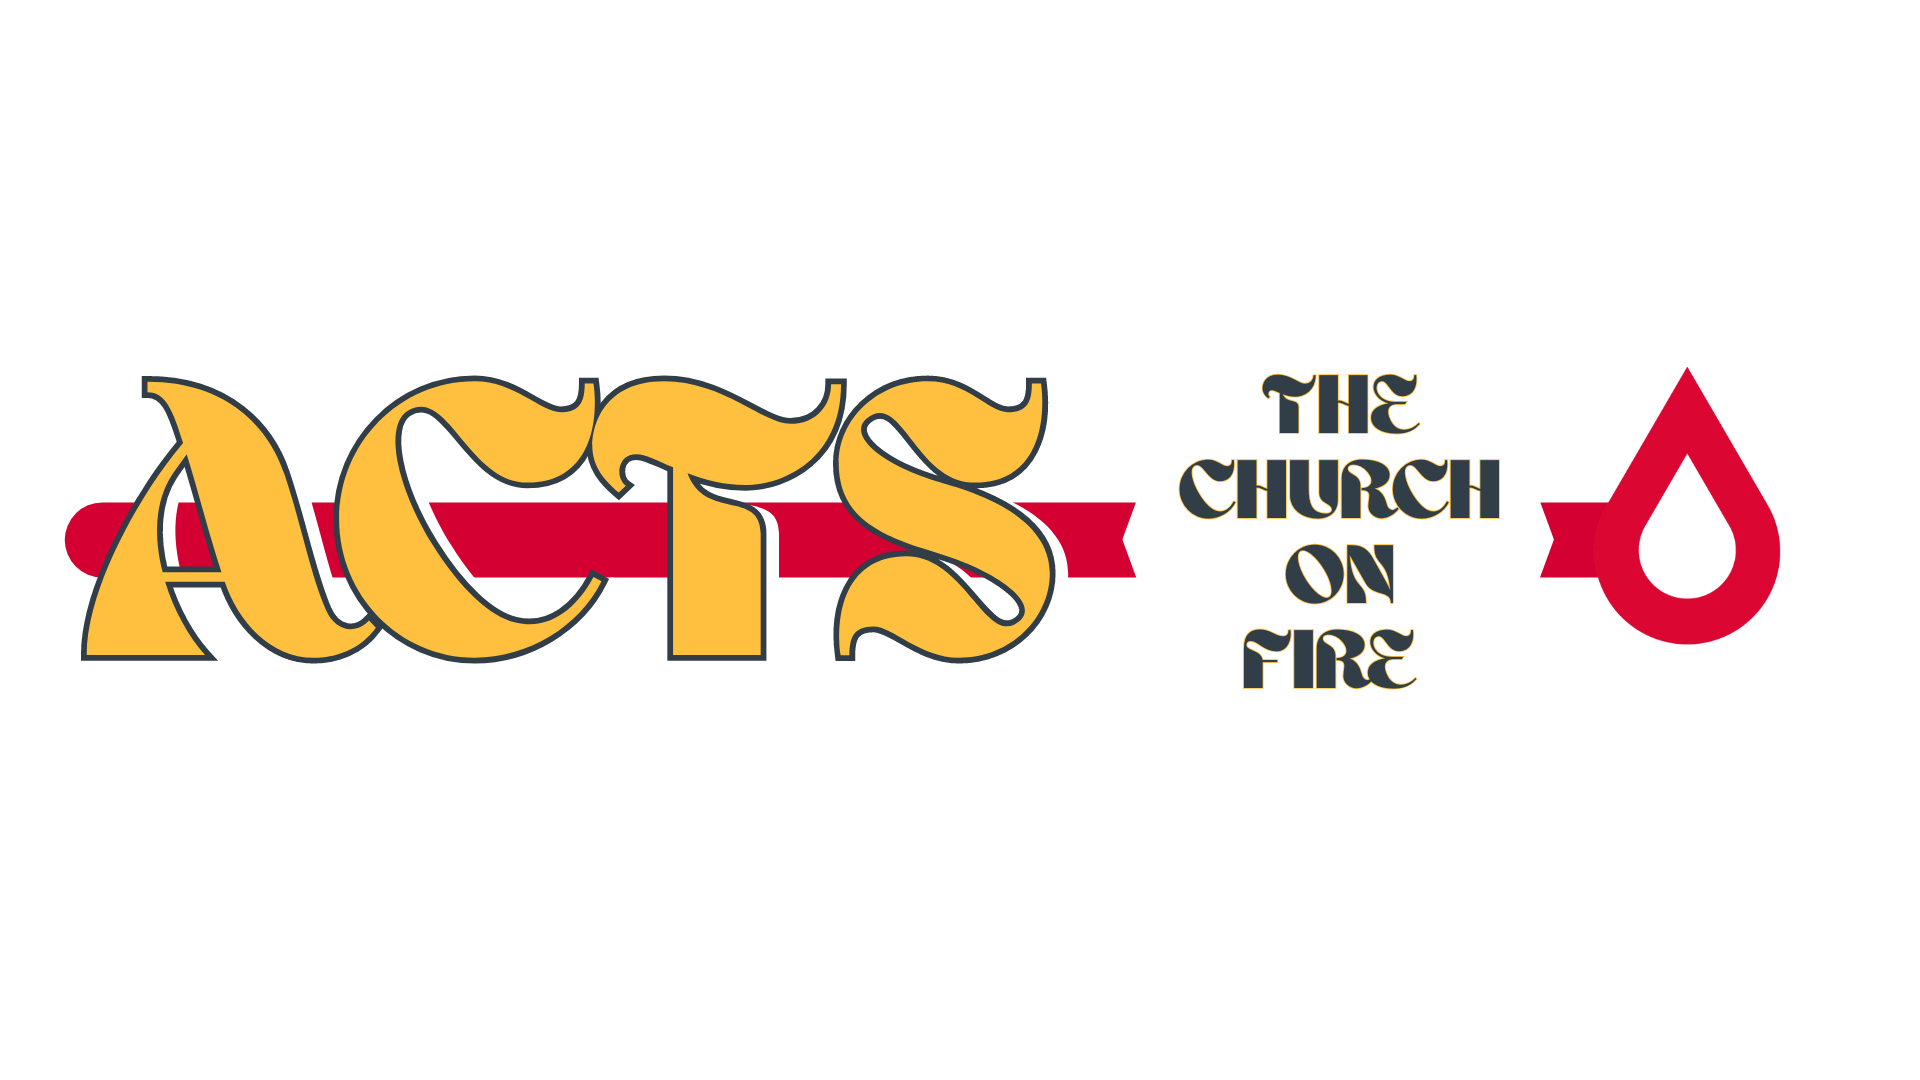 The Marks of a 'Church on Fire'